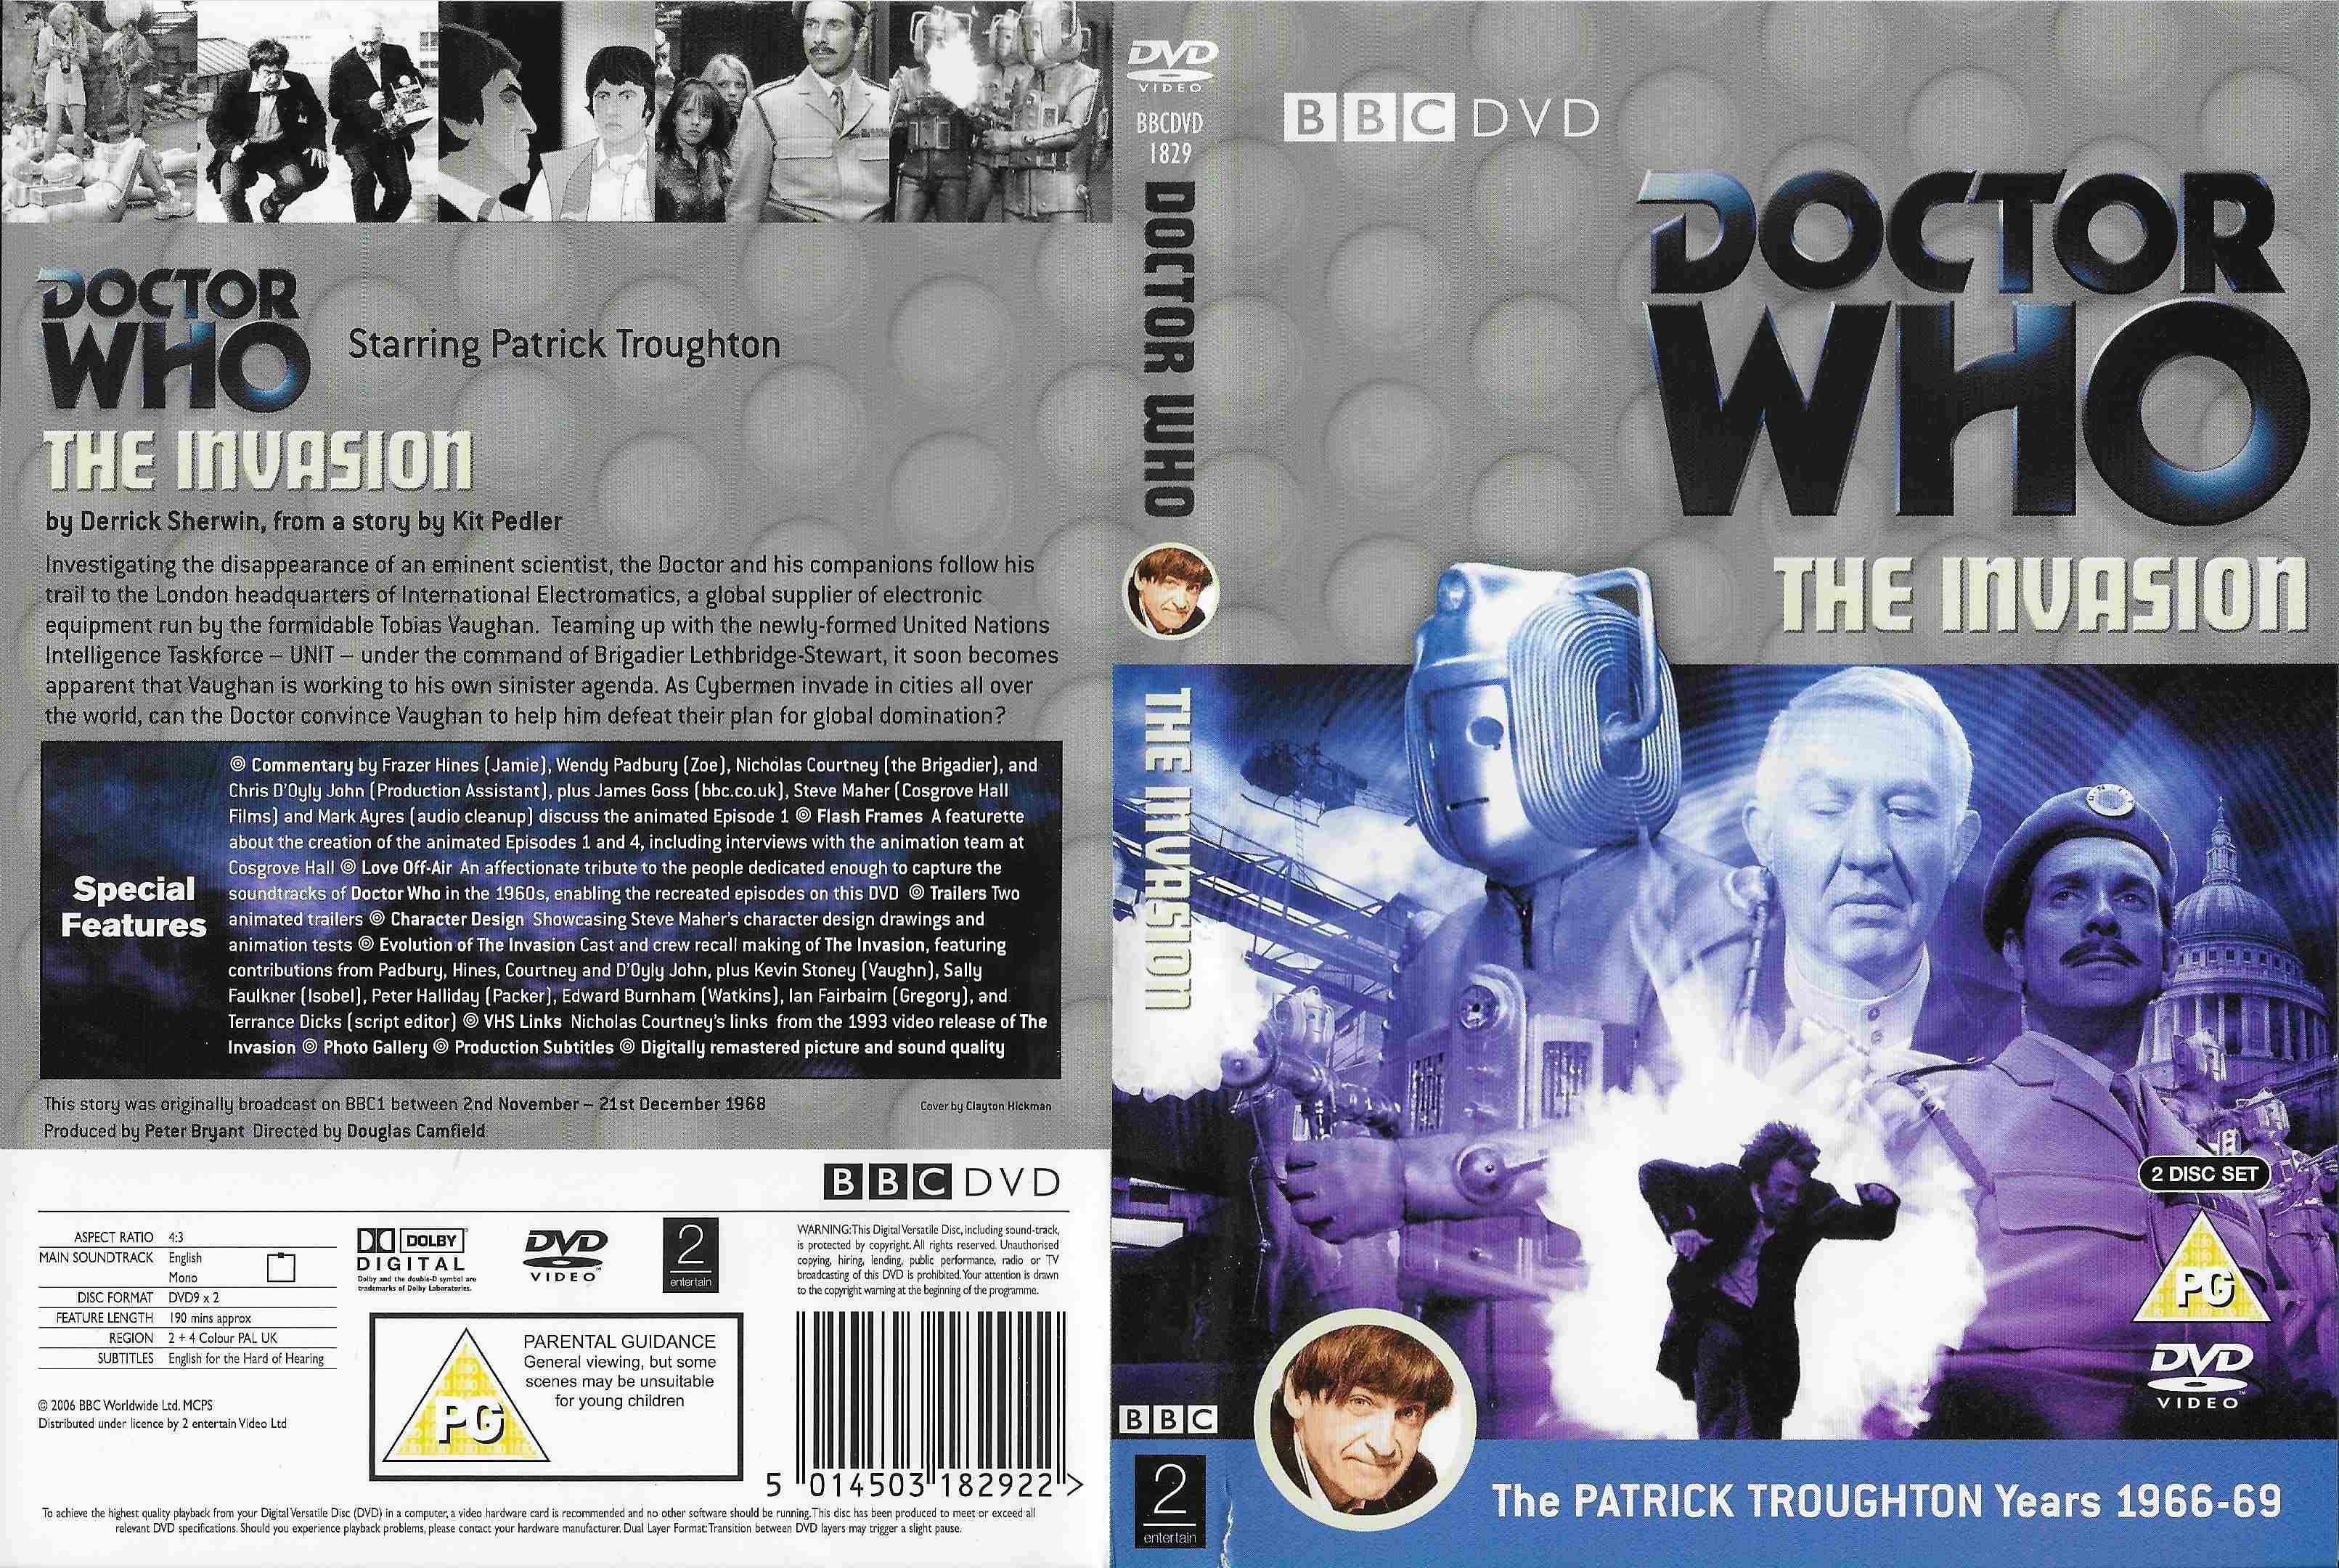 Picture of BBCDVD 1829 Doctor Who - The invasion by artist Derrick Sherwin from the BBC records and Tapes library